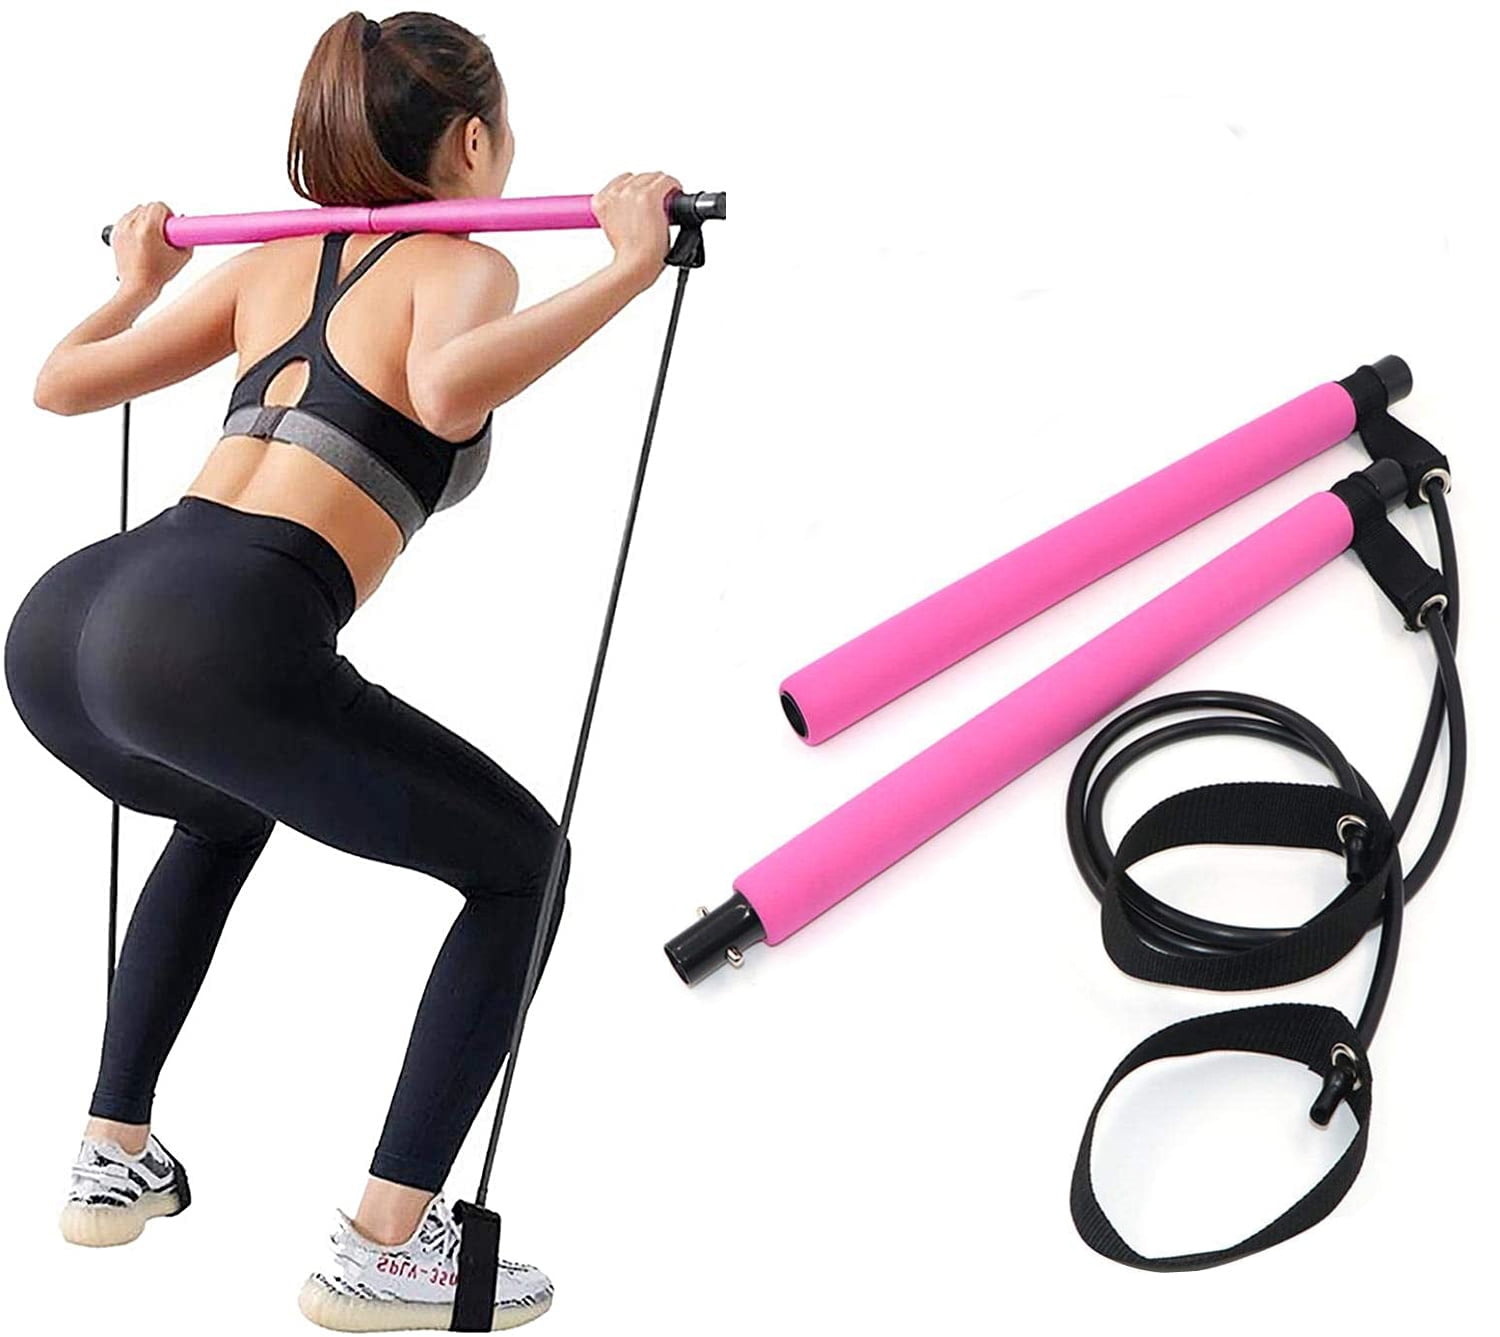 Dropship Yoga Exercise Portable Pilates Bar With Foot Loops For Total Body  Workout to Sell Online at a Lower Price